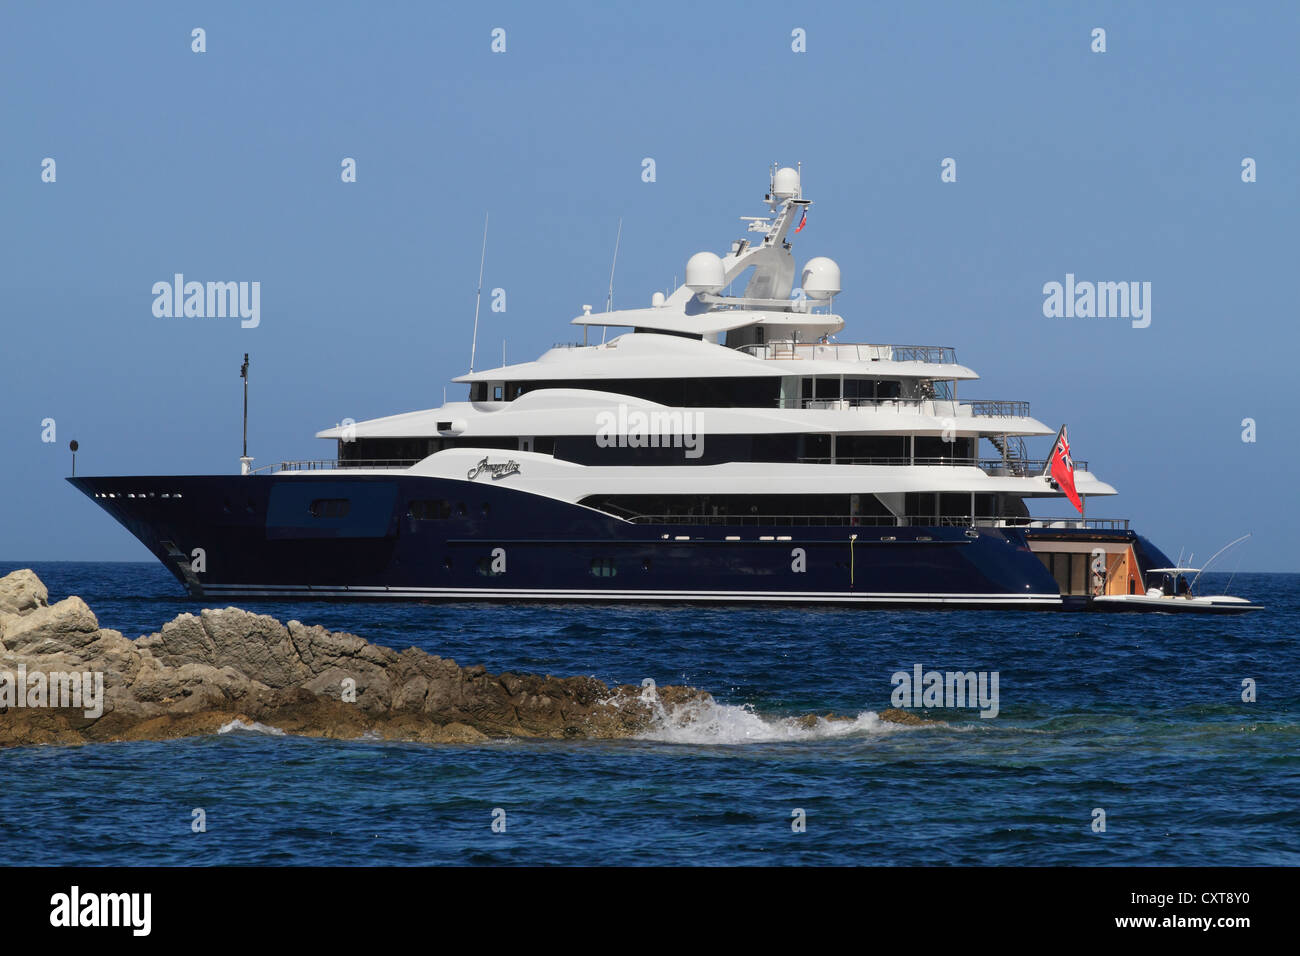 Amaryllis, a cruiser built by Abeking & Rasmussen, length: 78.43 meters, built in 2011, French Riviera, France, Europe Stock Photo